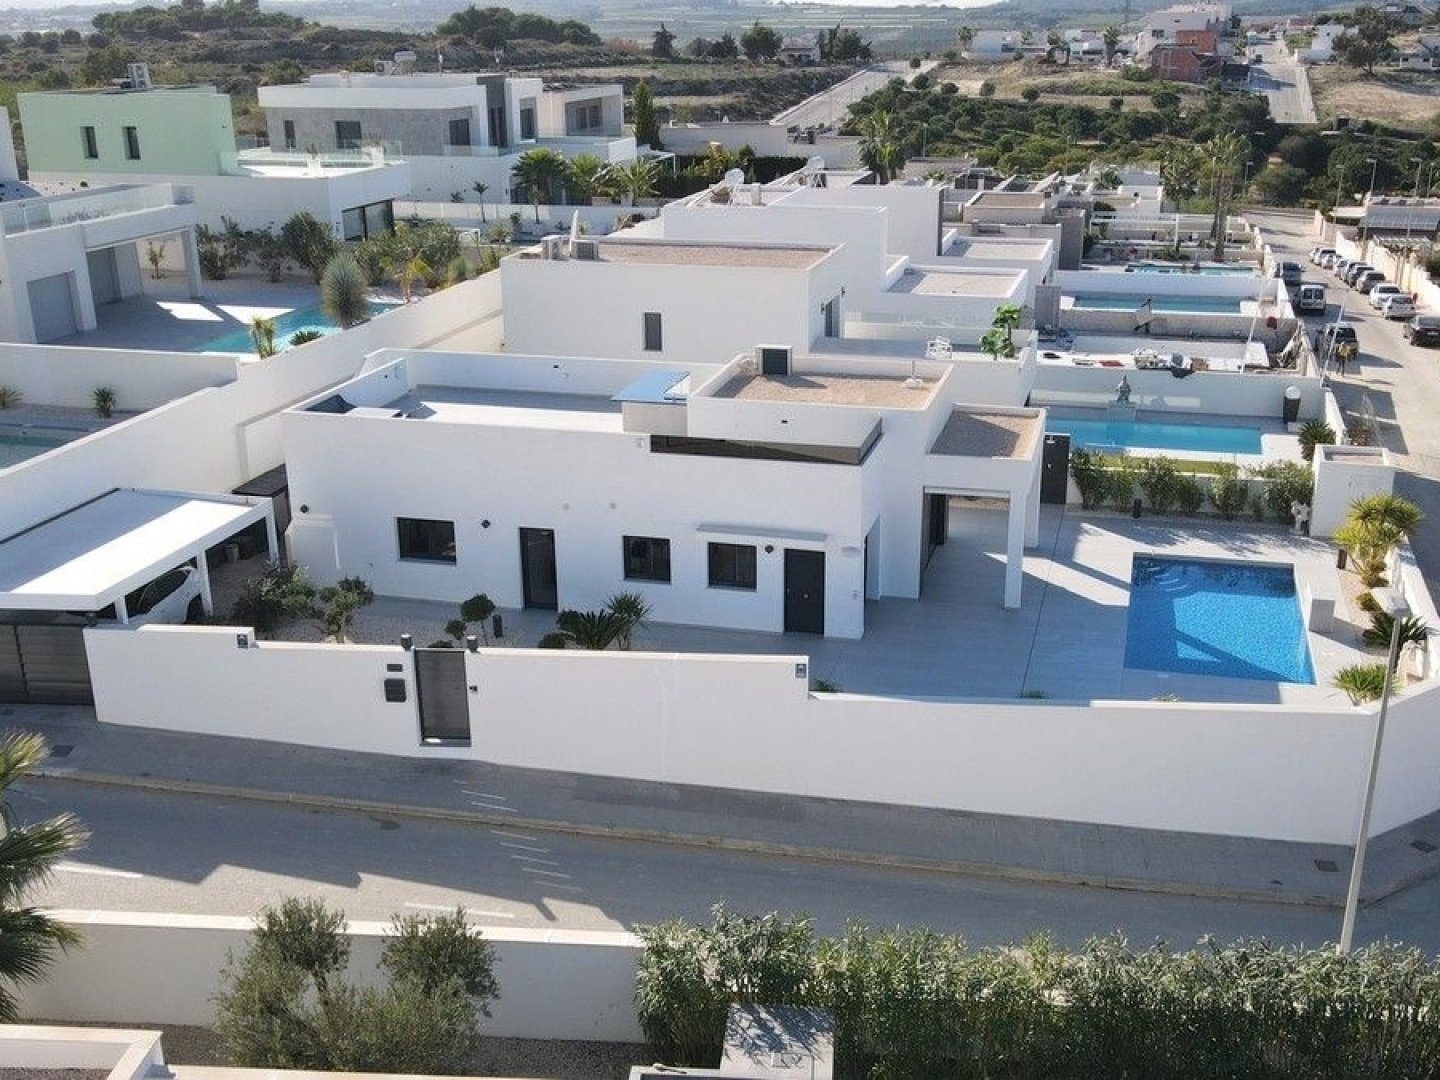 Villa in Benijofar with 3 bed and 2 bath